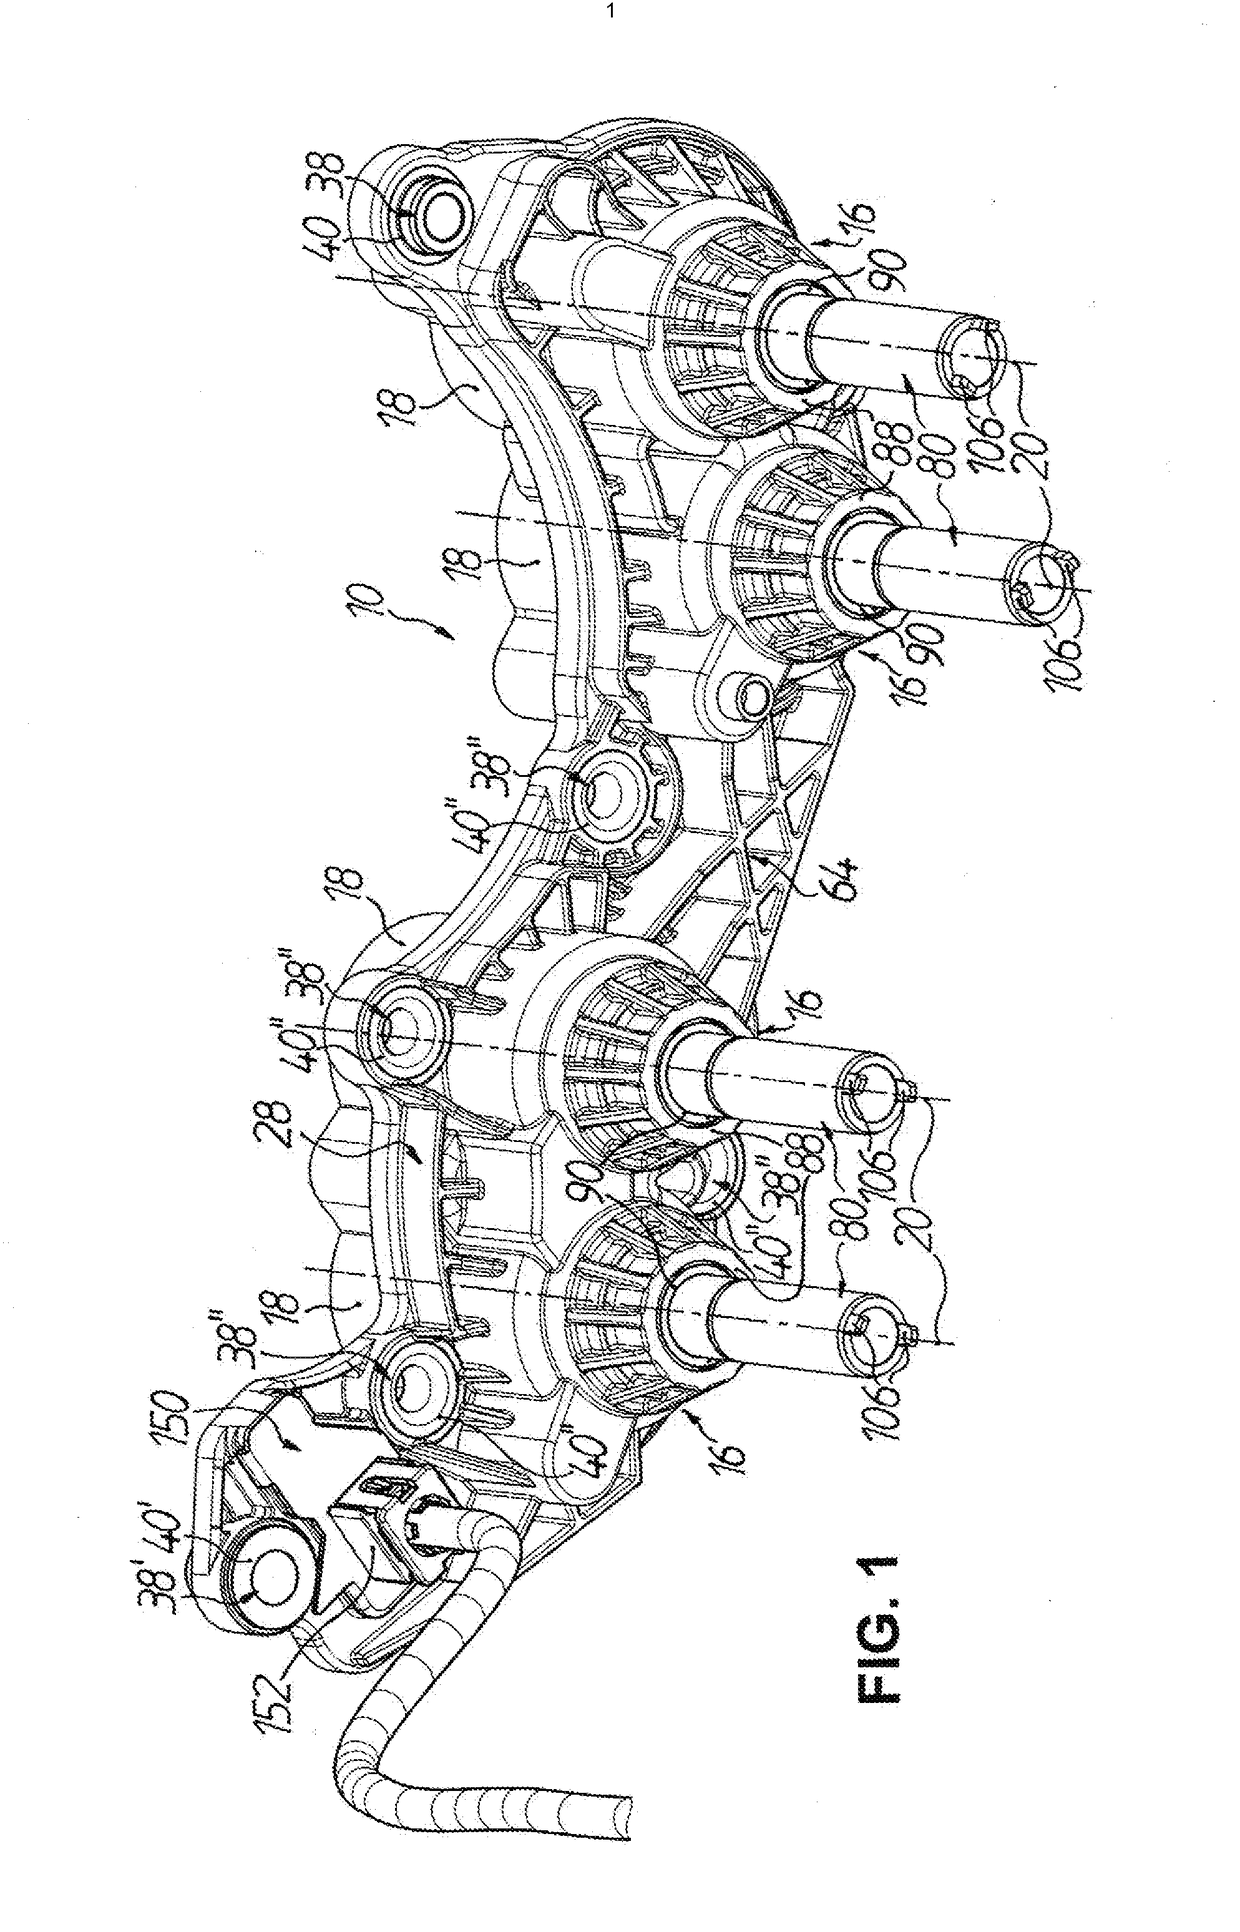 Hydraulic actuating device for actuation of setting elements in a motor vehicle transmission